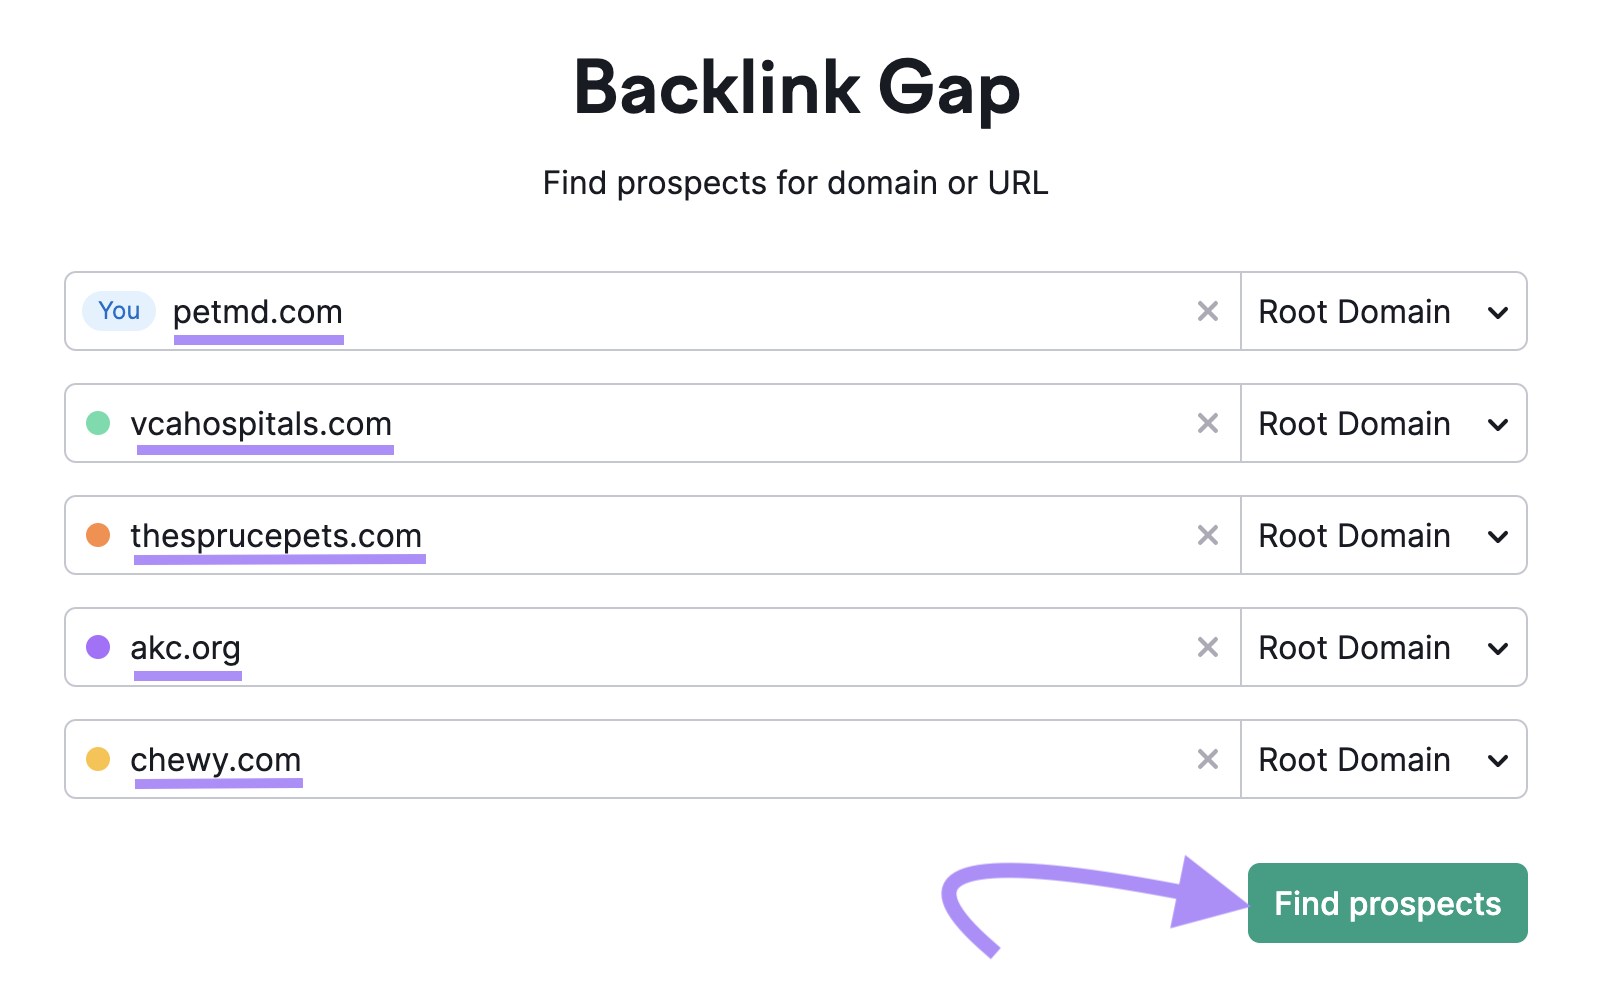 "vcahosipitals.com," "thesprucepets.com," "akc.org," and "chewy.com" entered into the Backlink Gap competitors' text boxes